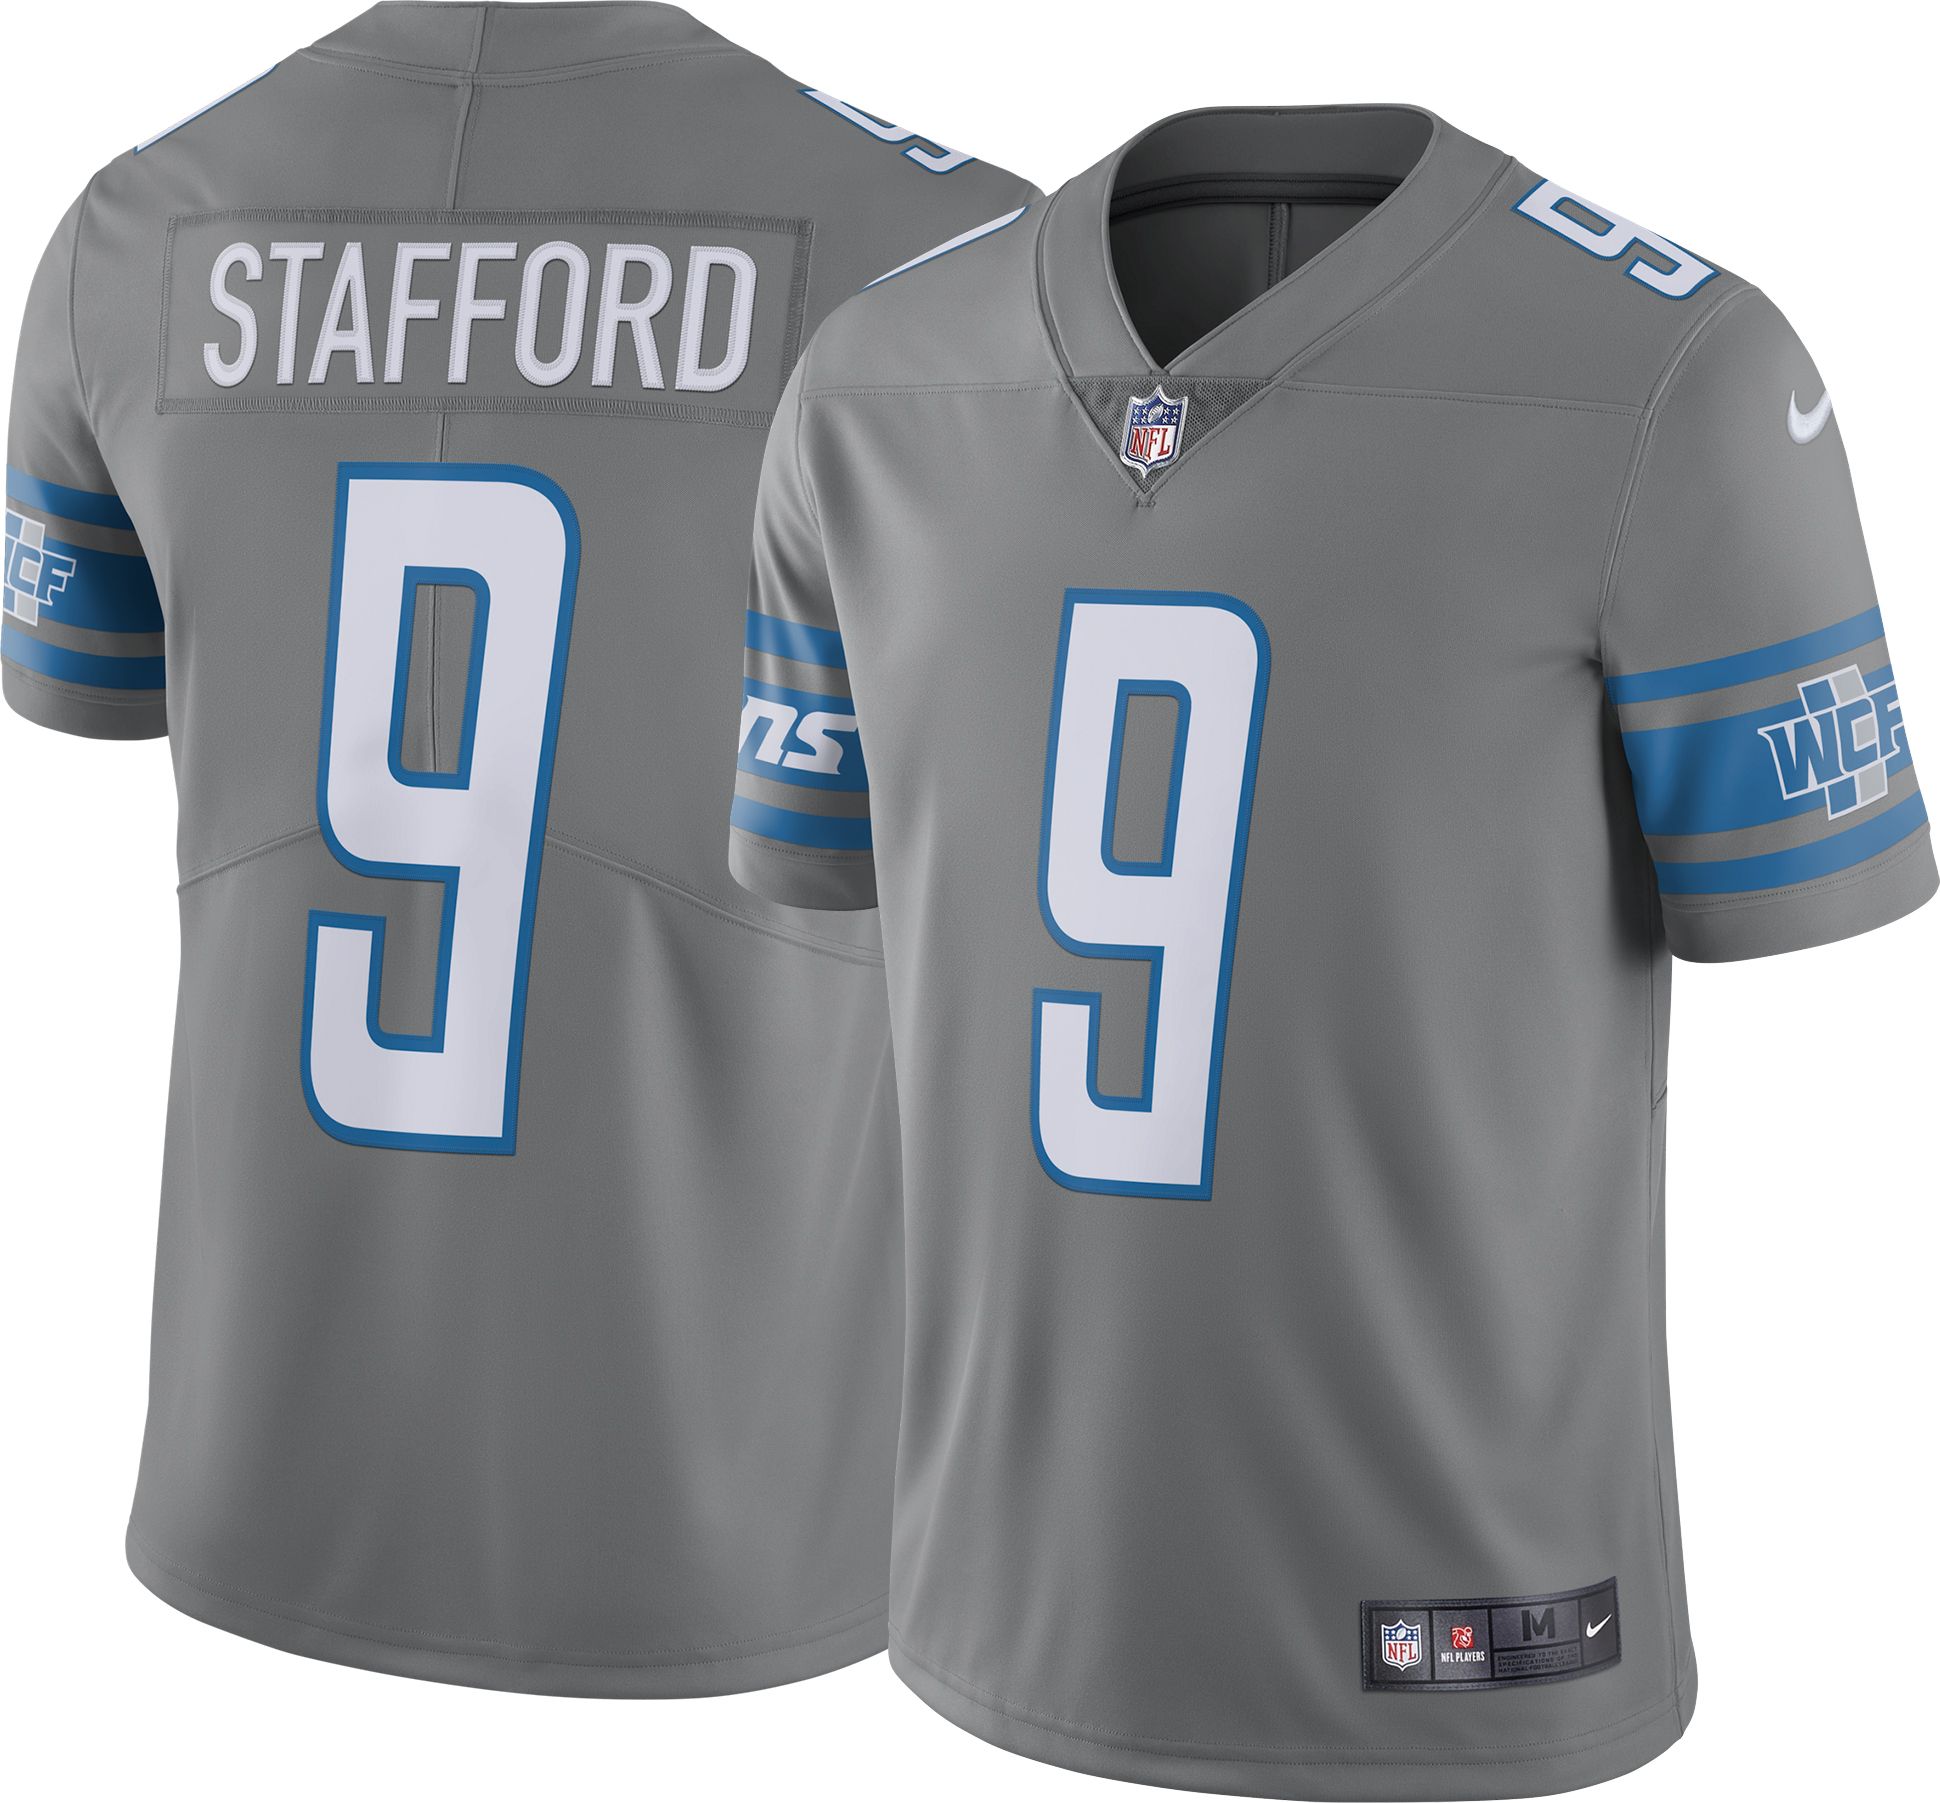 the stafford jersey